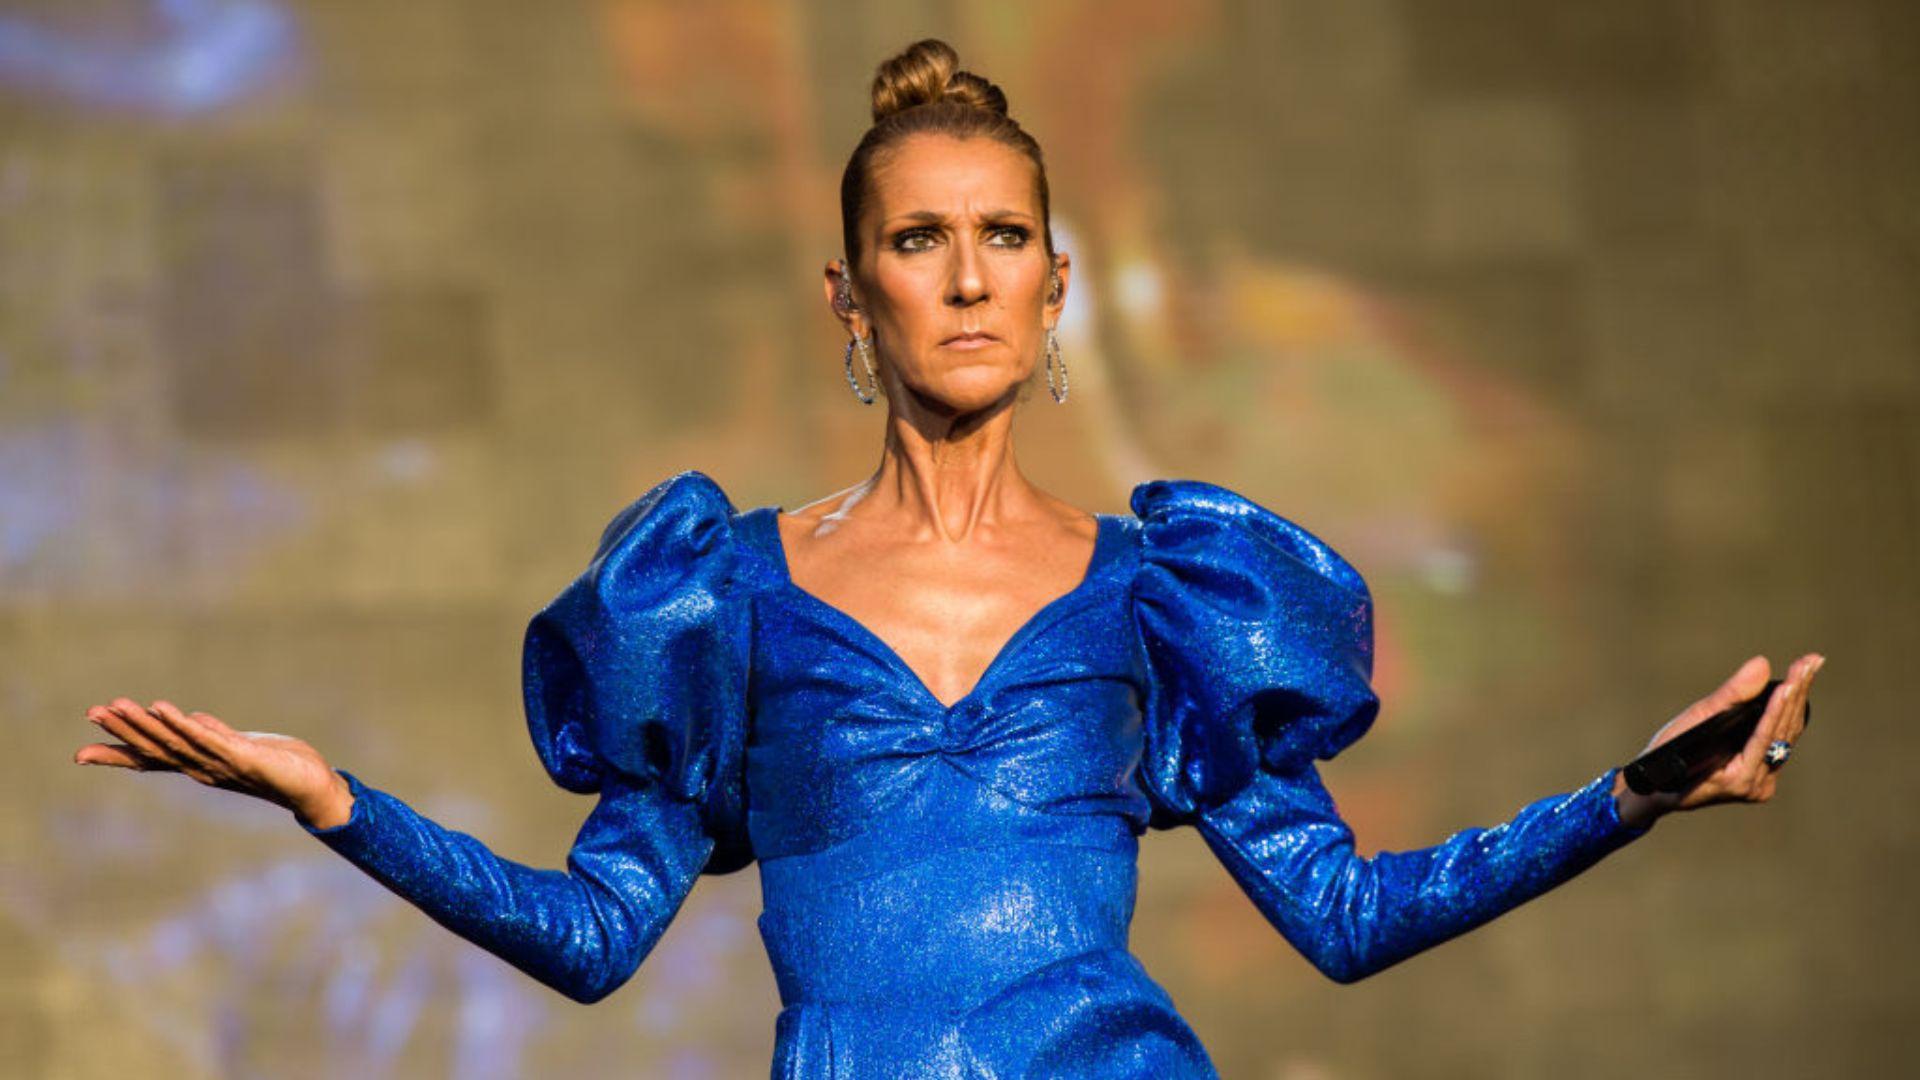 Céline Dion wearing a shimmering blue metallic dress with pronounced shoulder puffs and a plunging neckline. Her hair is styled in a tight bun, and she accessorizes with large hoop earrings